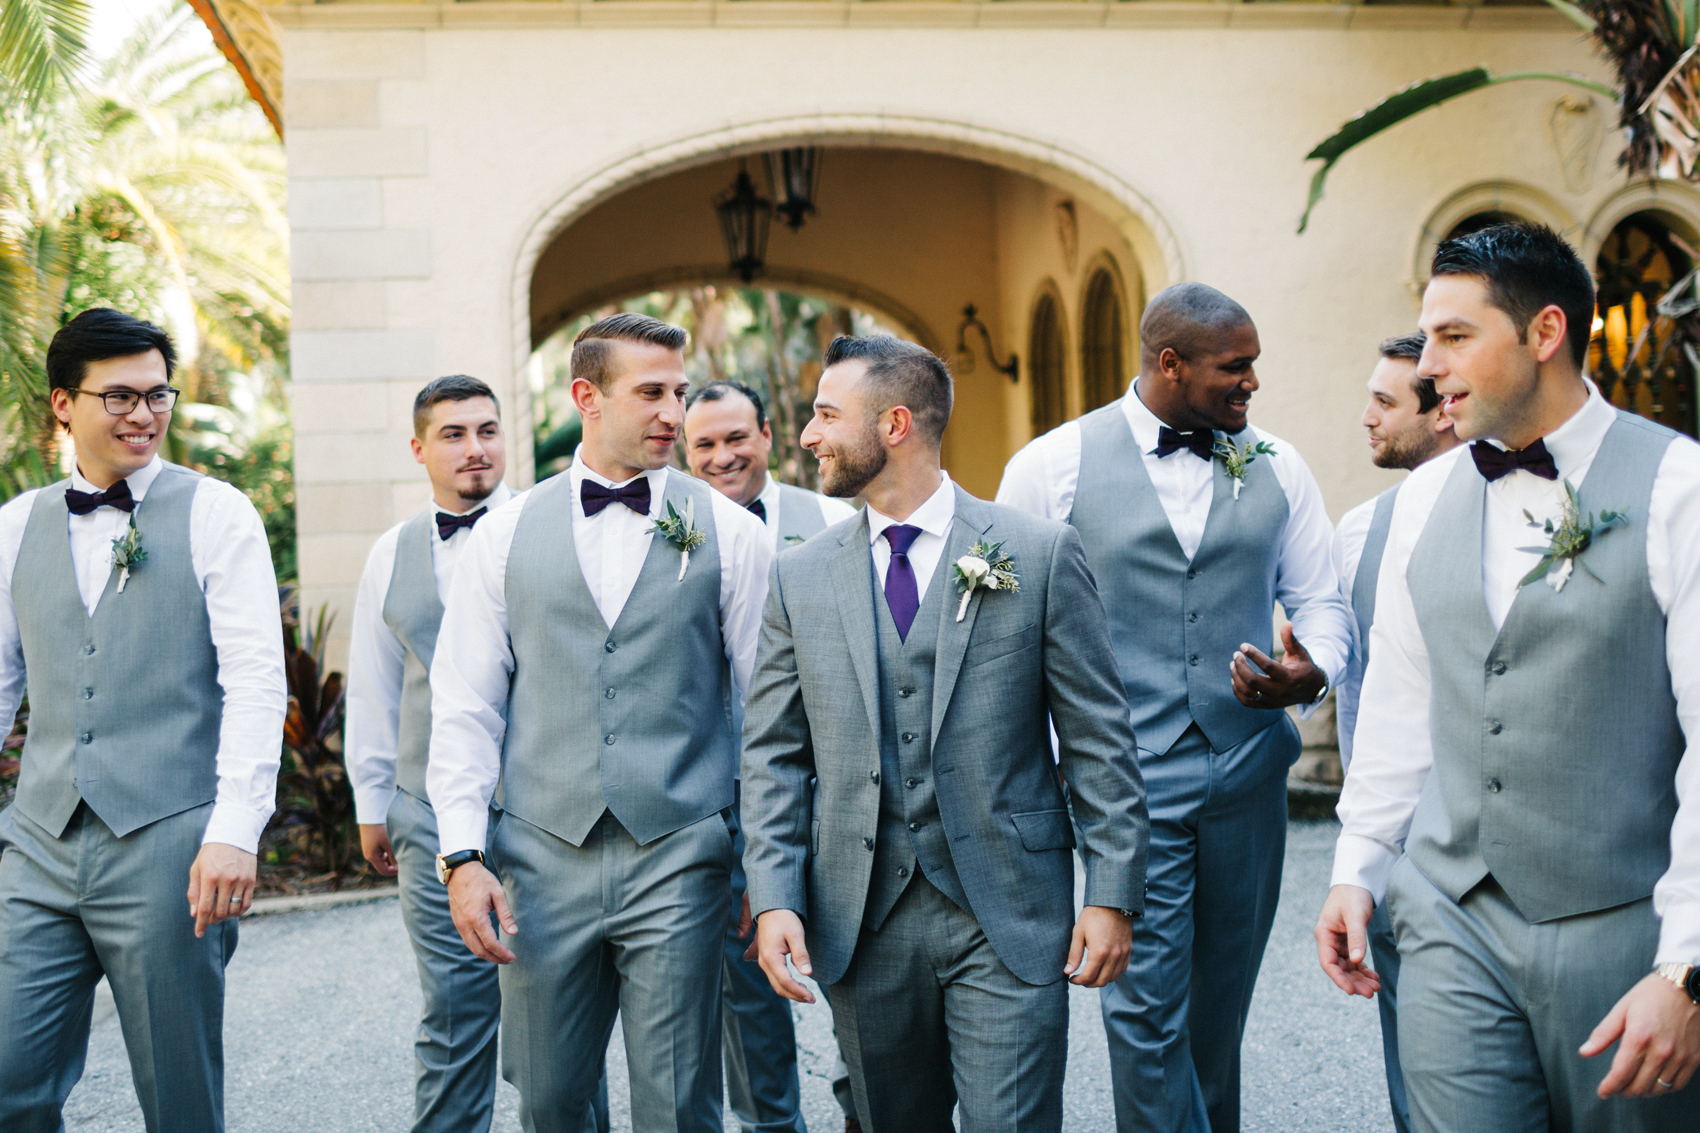 Candid photo of the groom hanging out with his groomsmen before the wedding ceremony